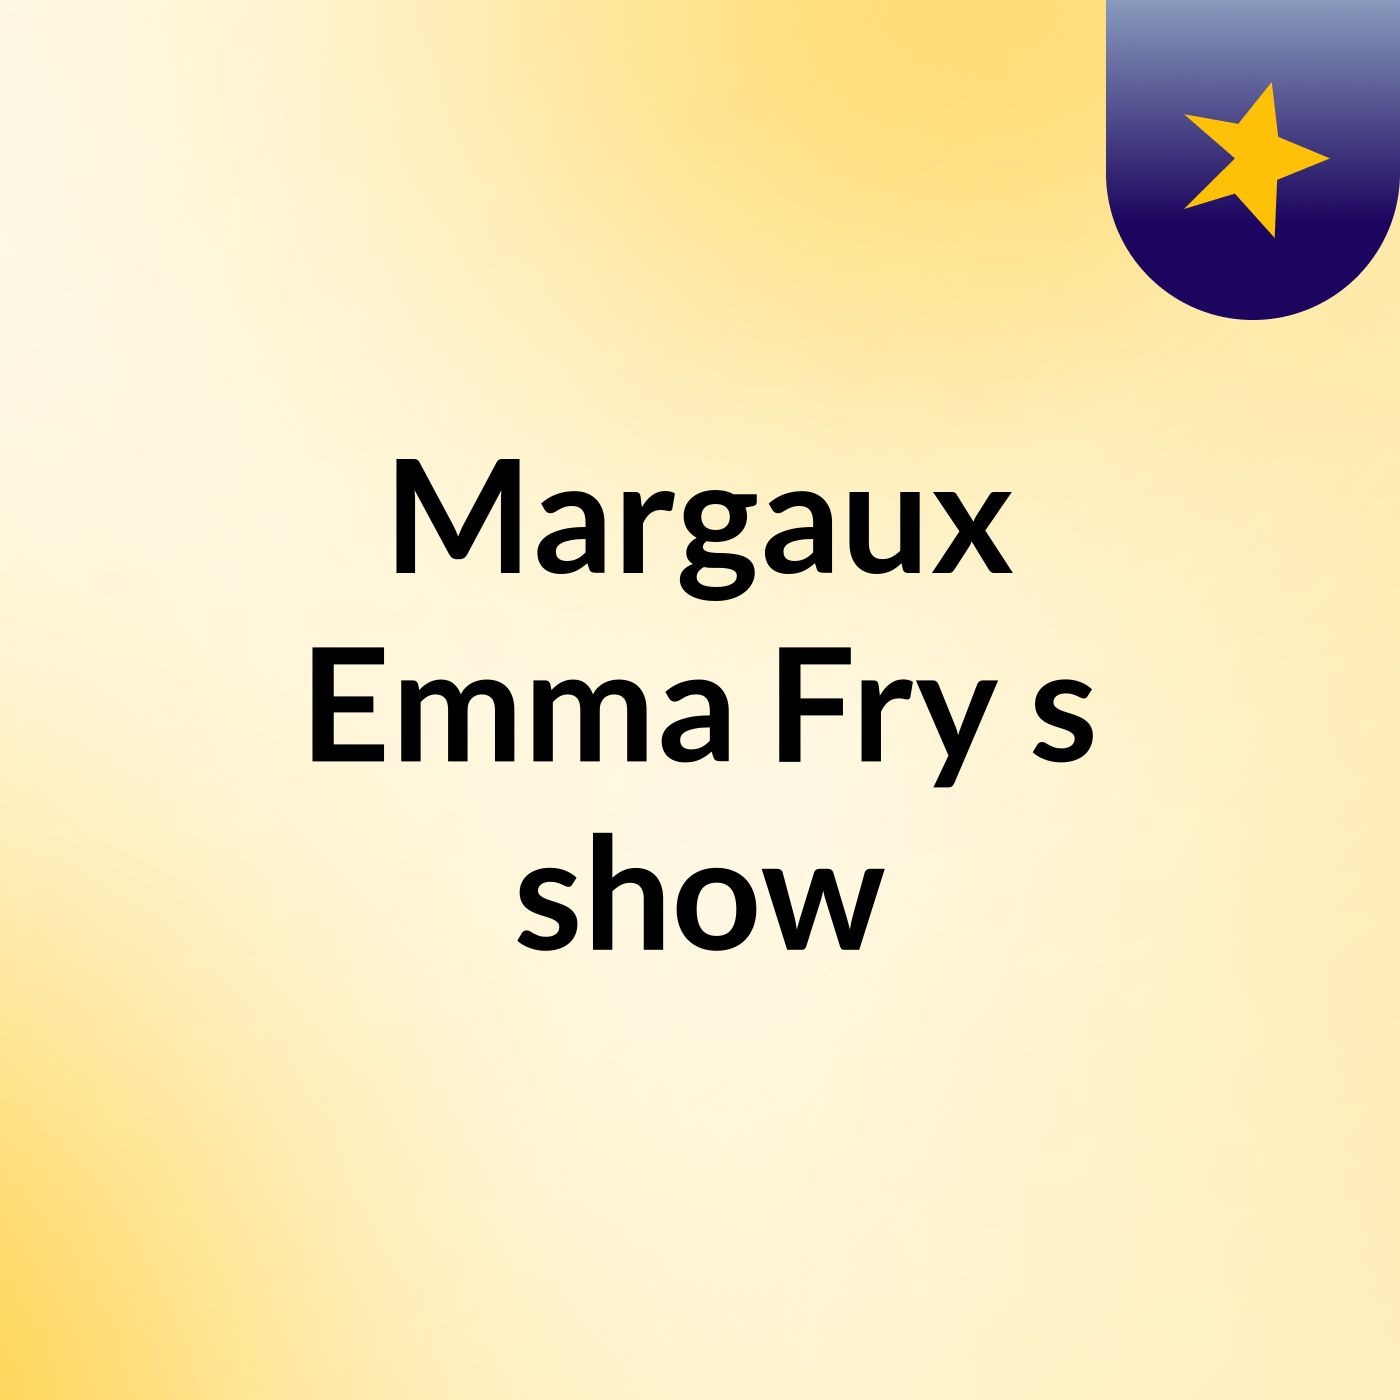 Margaux Emma Fry's show